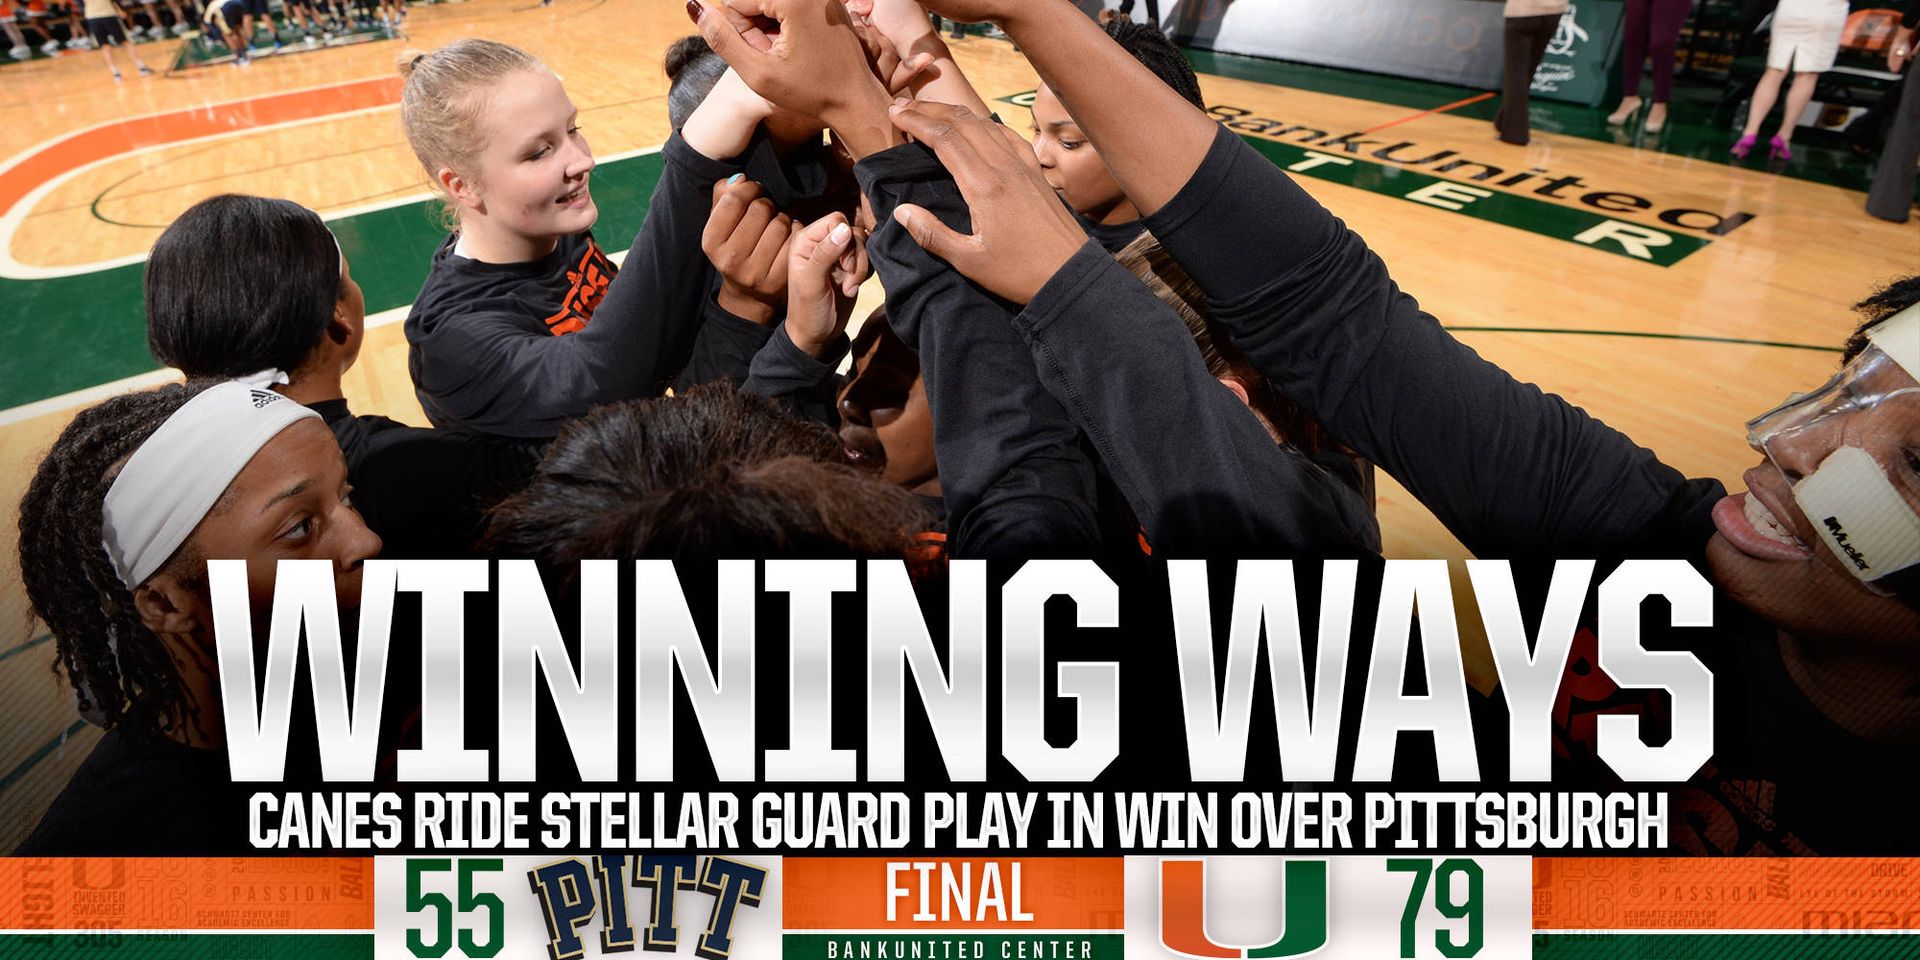 @CanesWBB Rides Guard Play to Top Pittsburgh